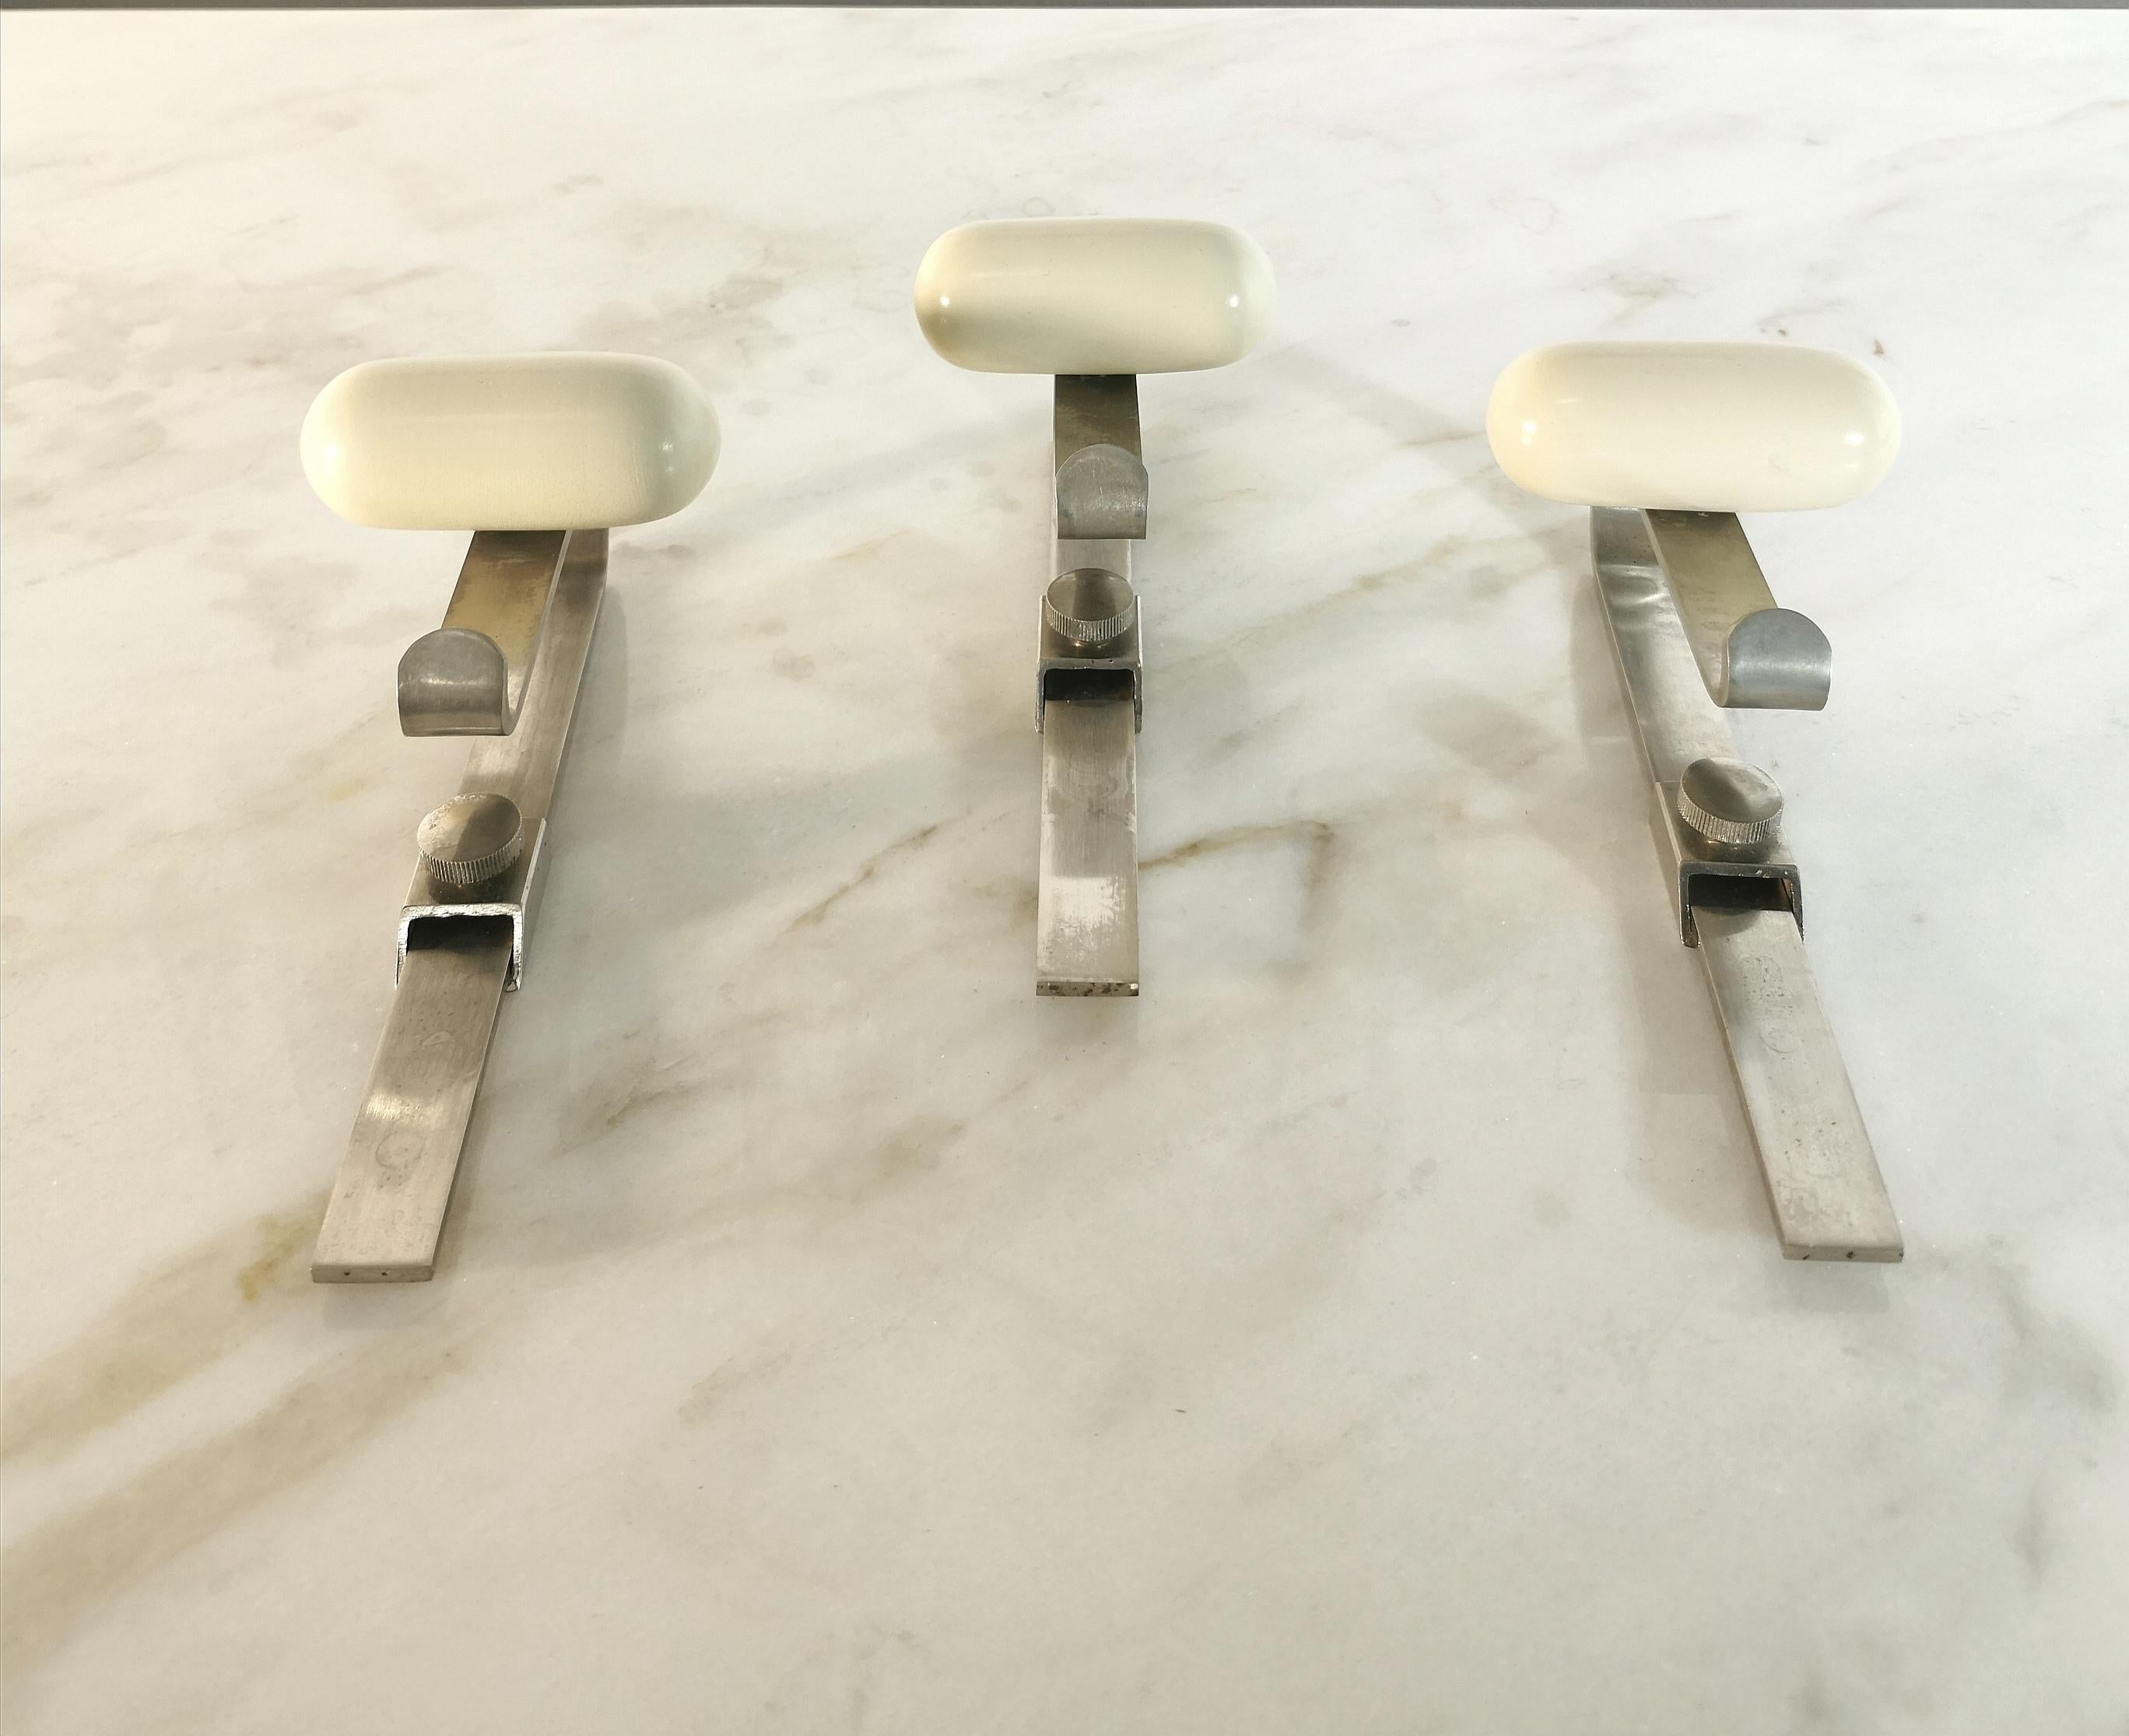 Set of 3 simpatic coat racks made in Italy in the 70s. 
Every single coat hanger is made of curved and brushed metal with an up and down movement accessory and enamelled wooden knob.